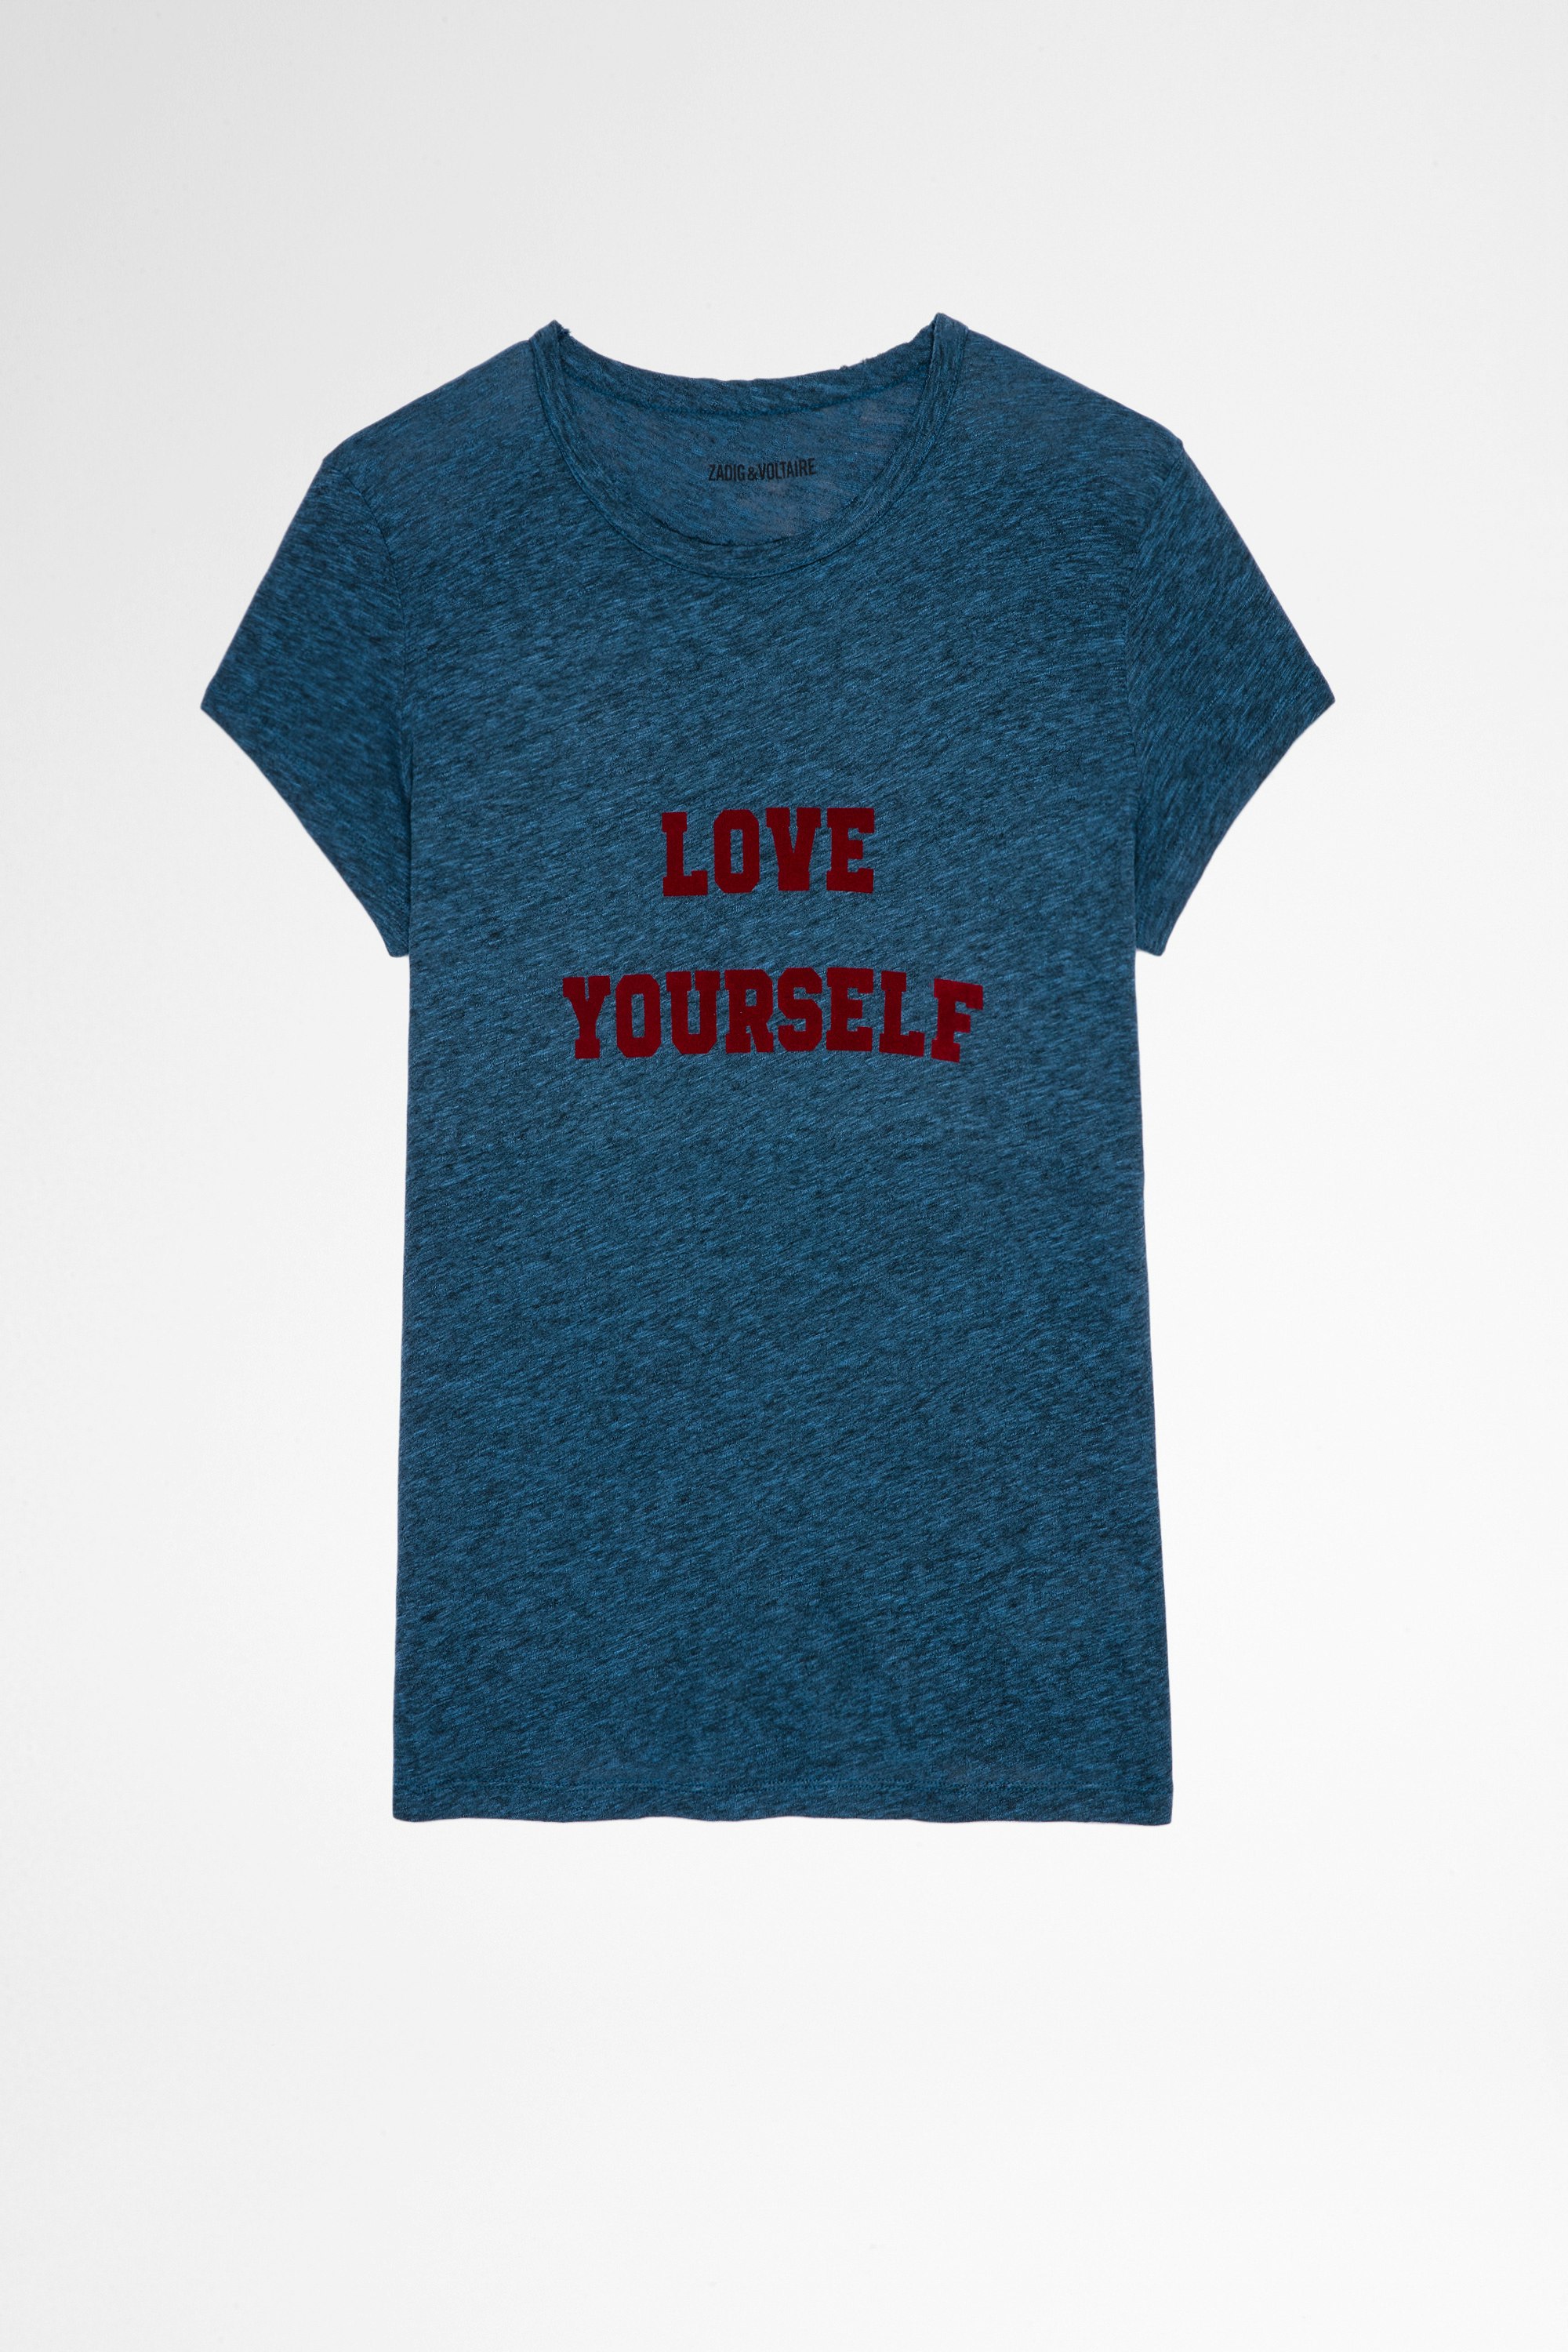 Walk Marl Love Yourself T-shirt Women's cotton and viscose t-shirt in blue with Love yourself print